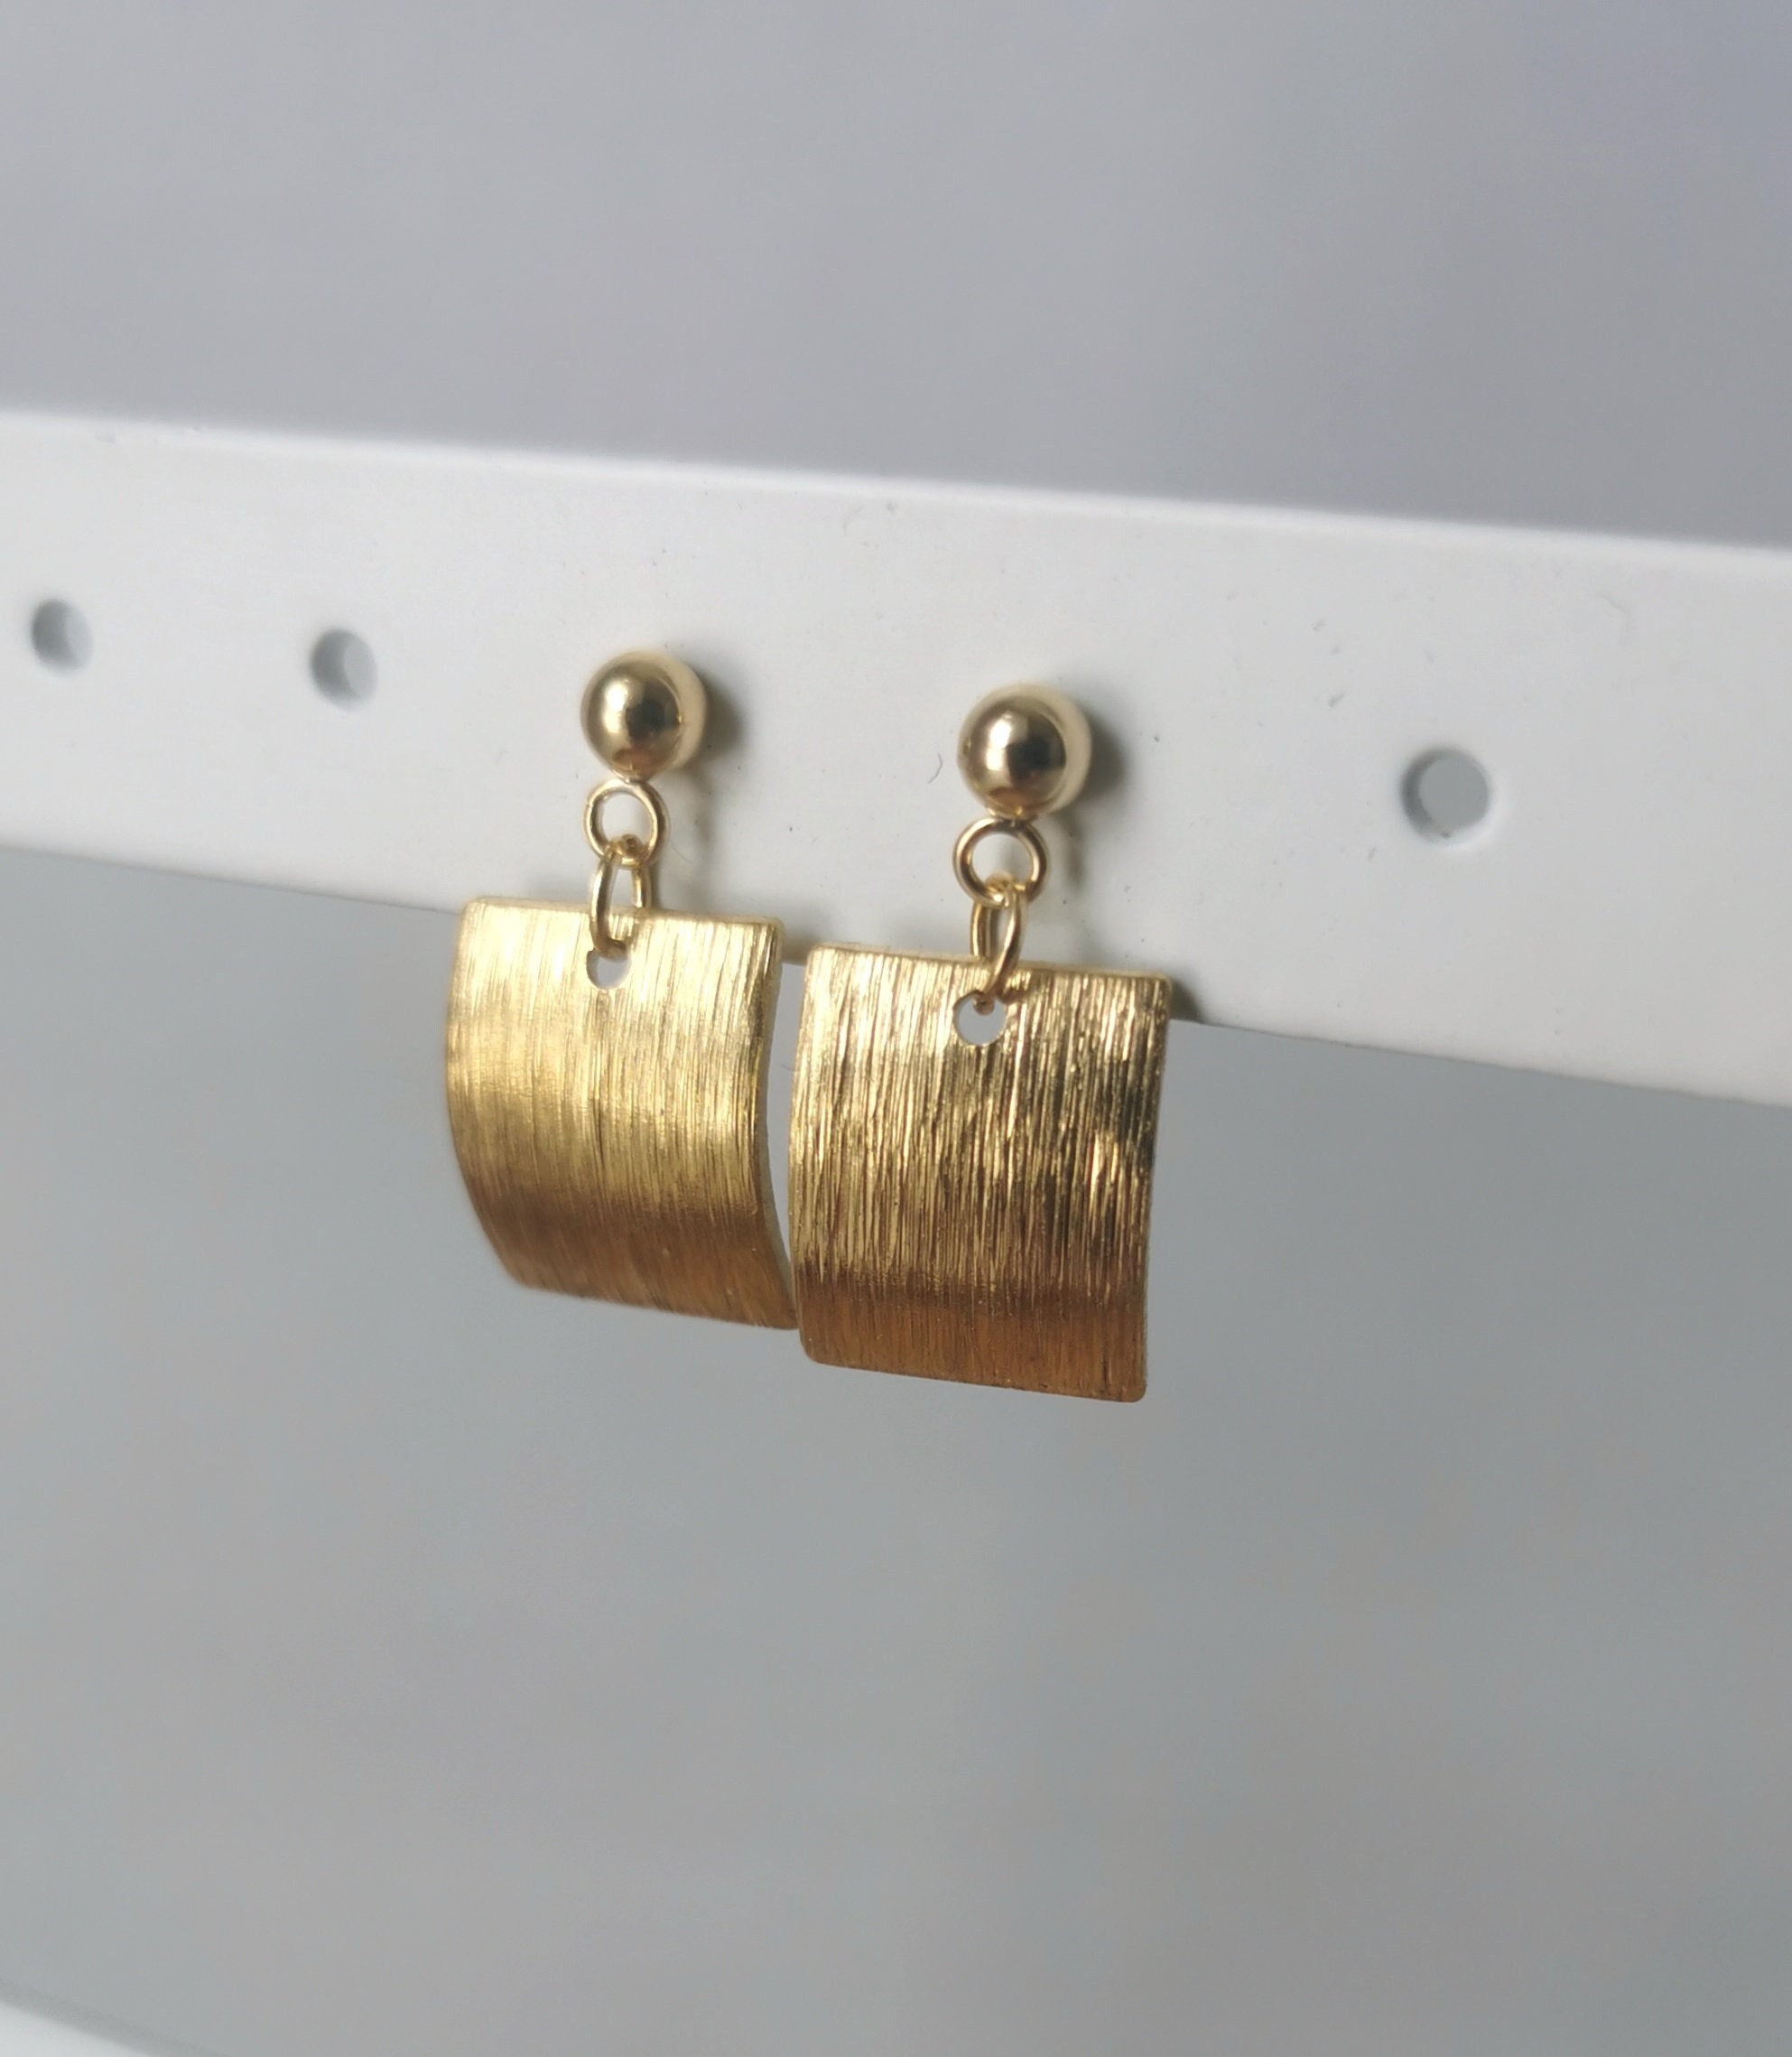 Gold Brass Geometric Earrings With Curved Textured Rectangle Charm & 18K Plated Ball Stud